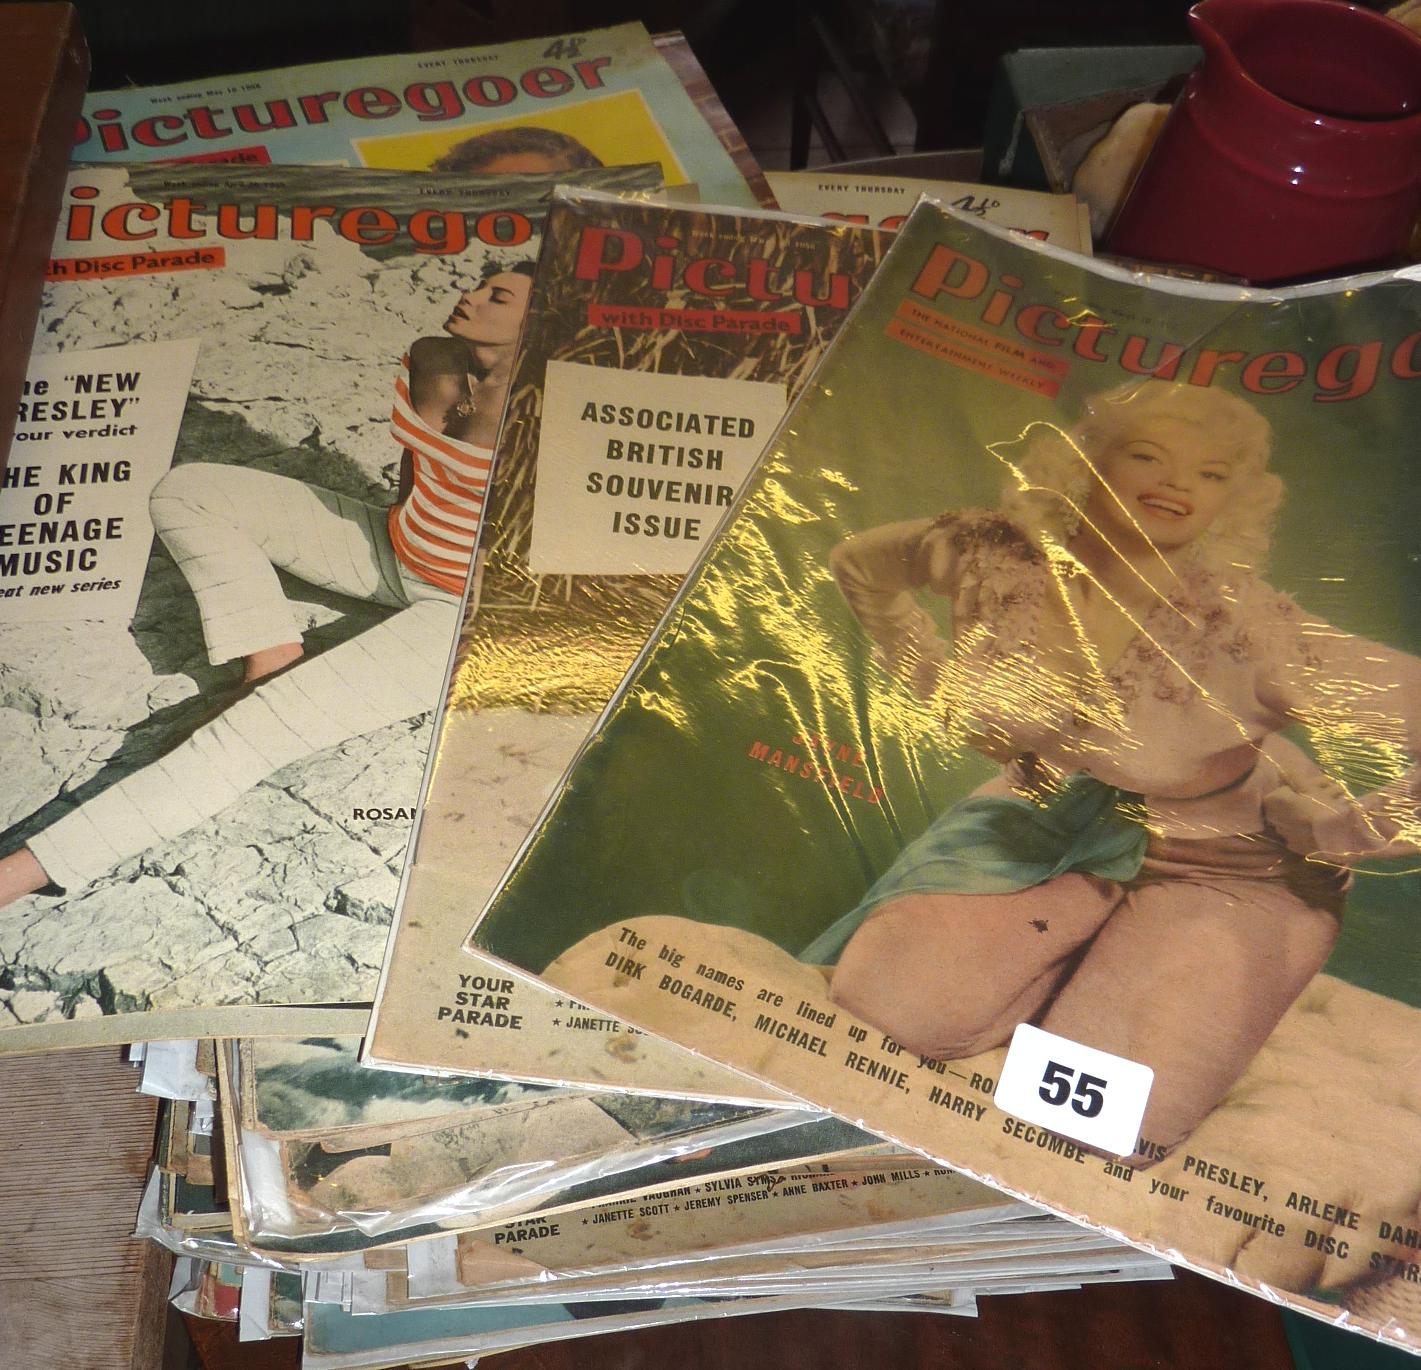 Large collection of "Picturegoer" magazines